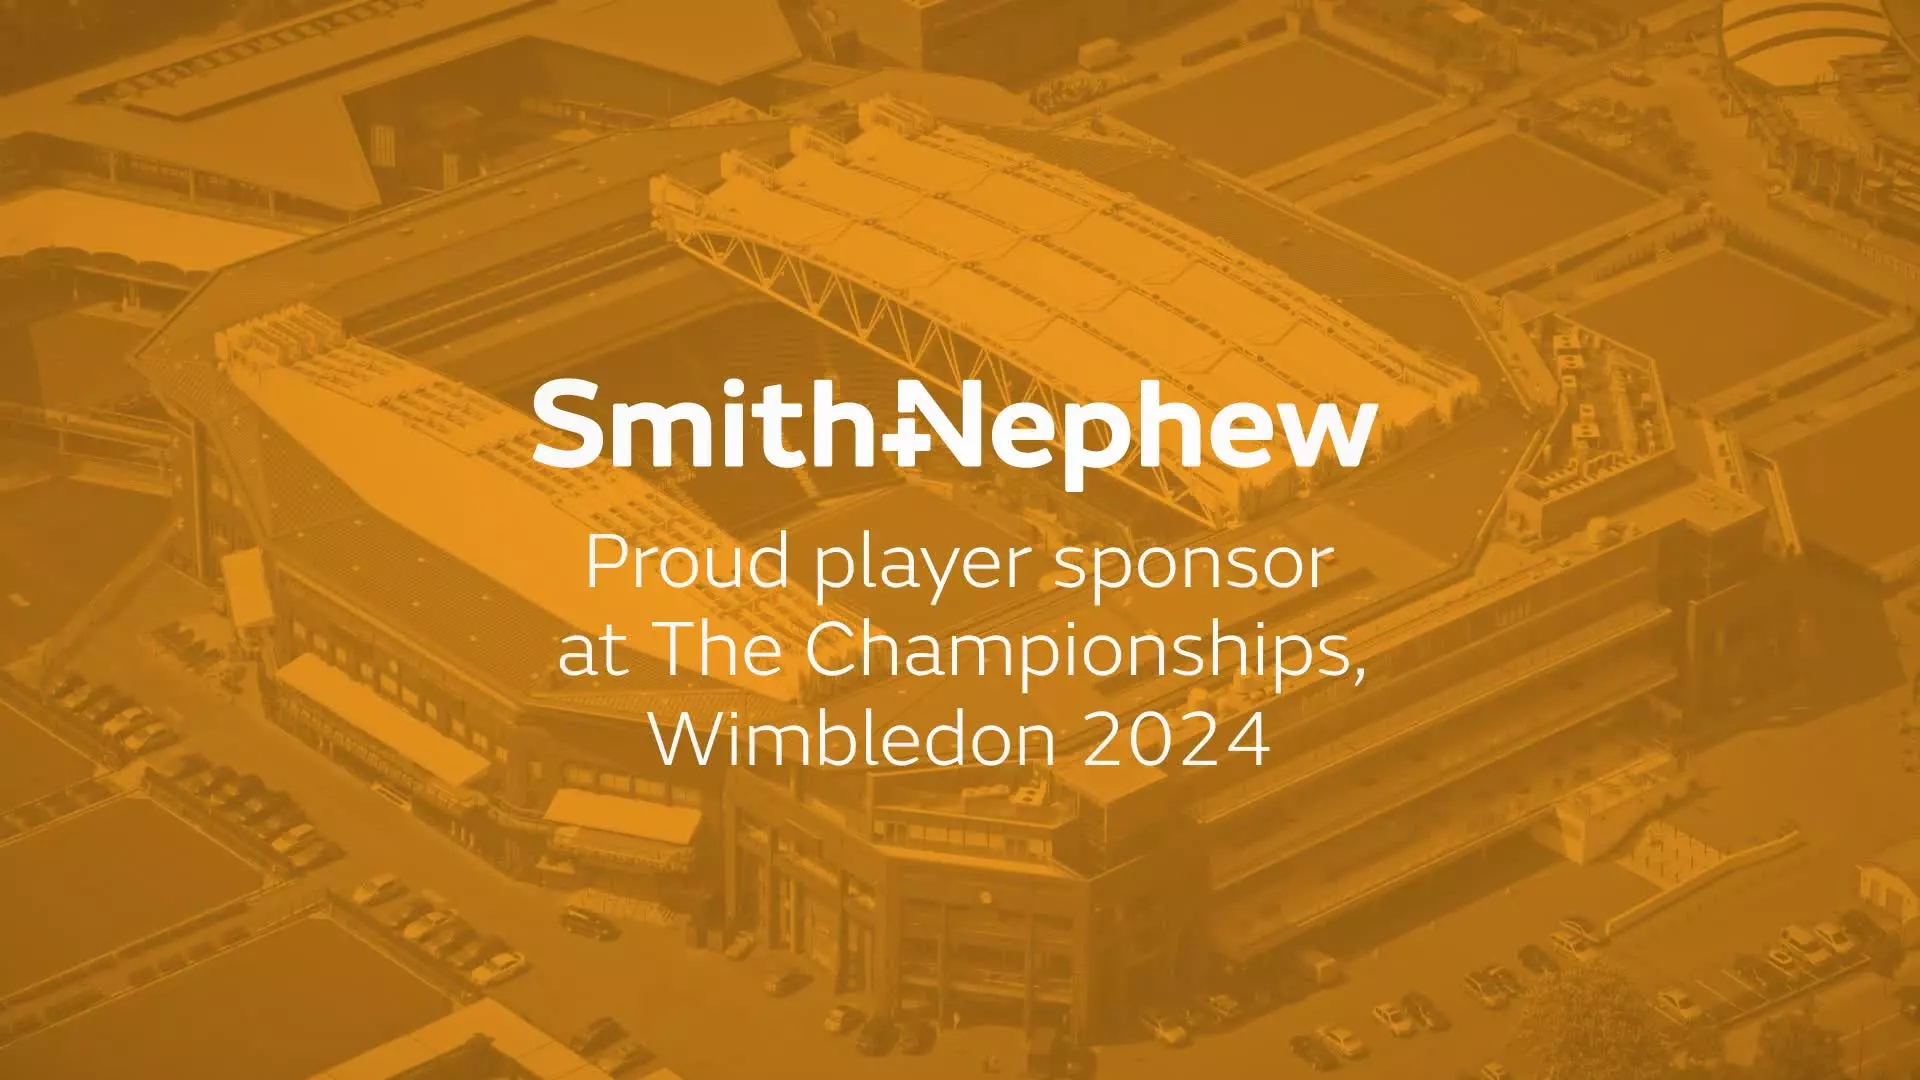 Smith+Nephew takes centre court sponsoring players competing at Wimbledon; global Sports Medicine technology leader helping athletes get back in the game 